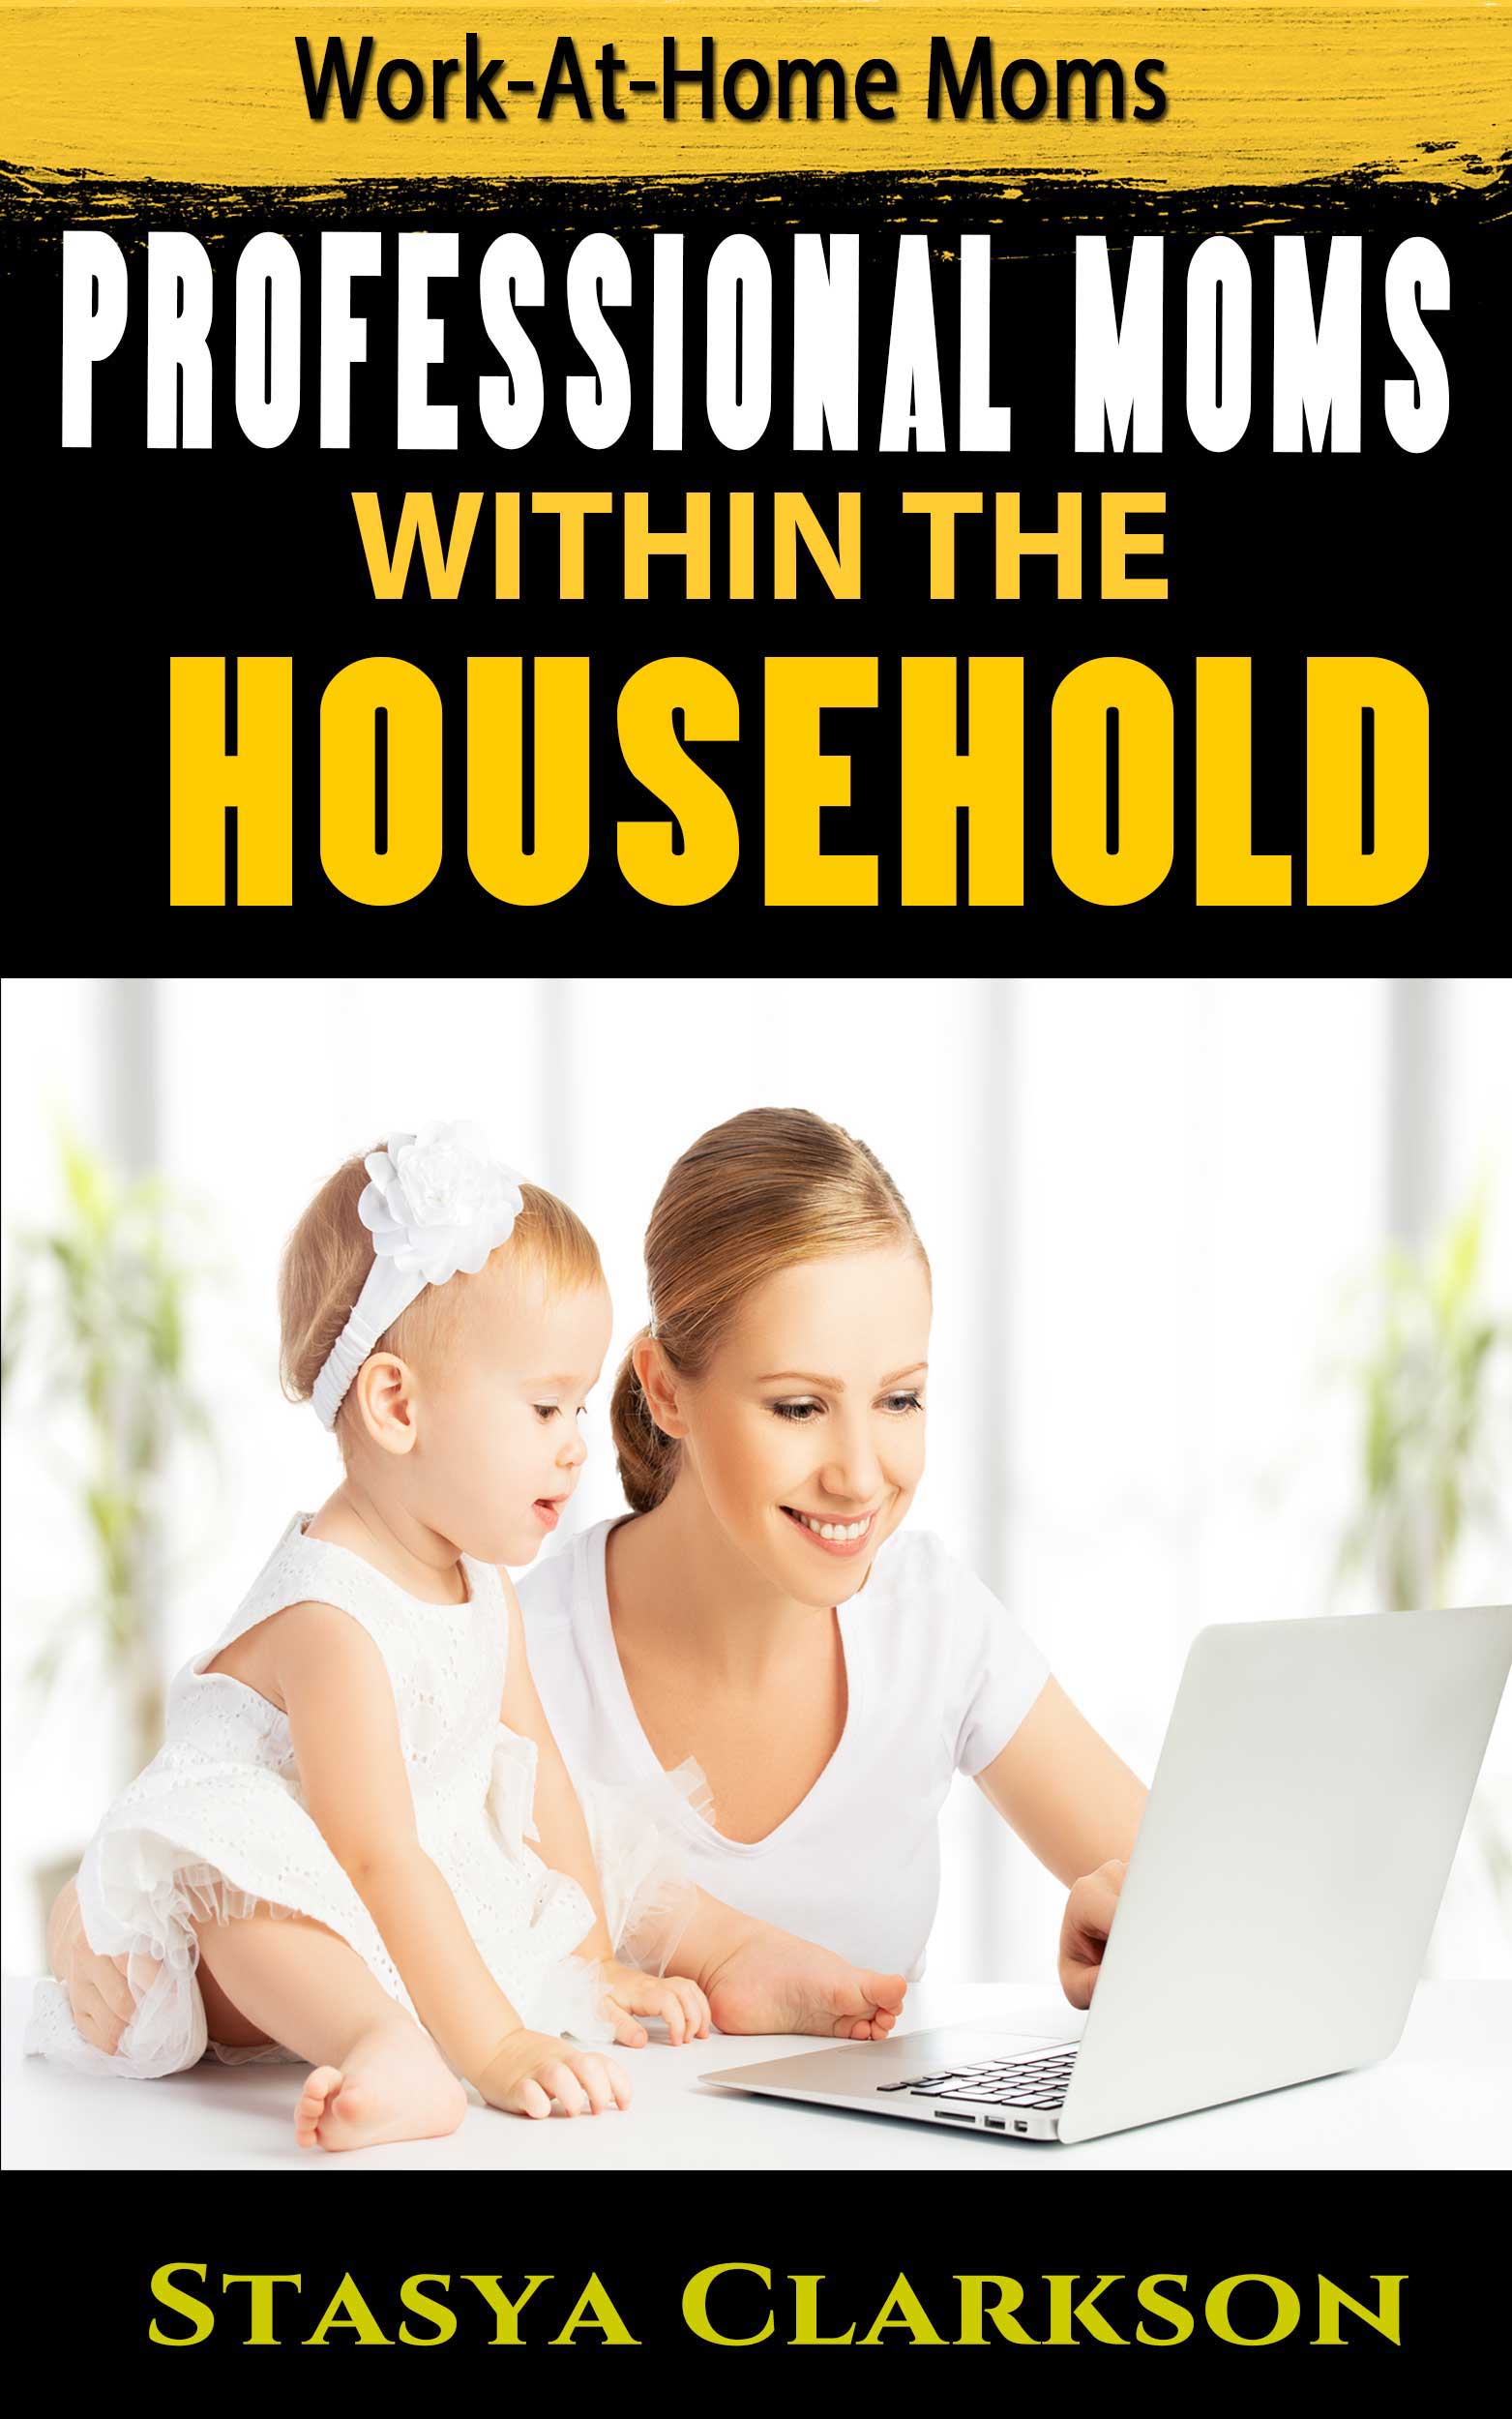 FREE: Professional Moms within the Household by Stasya Clarkson